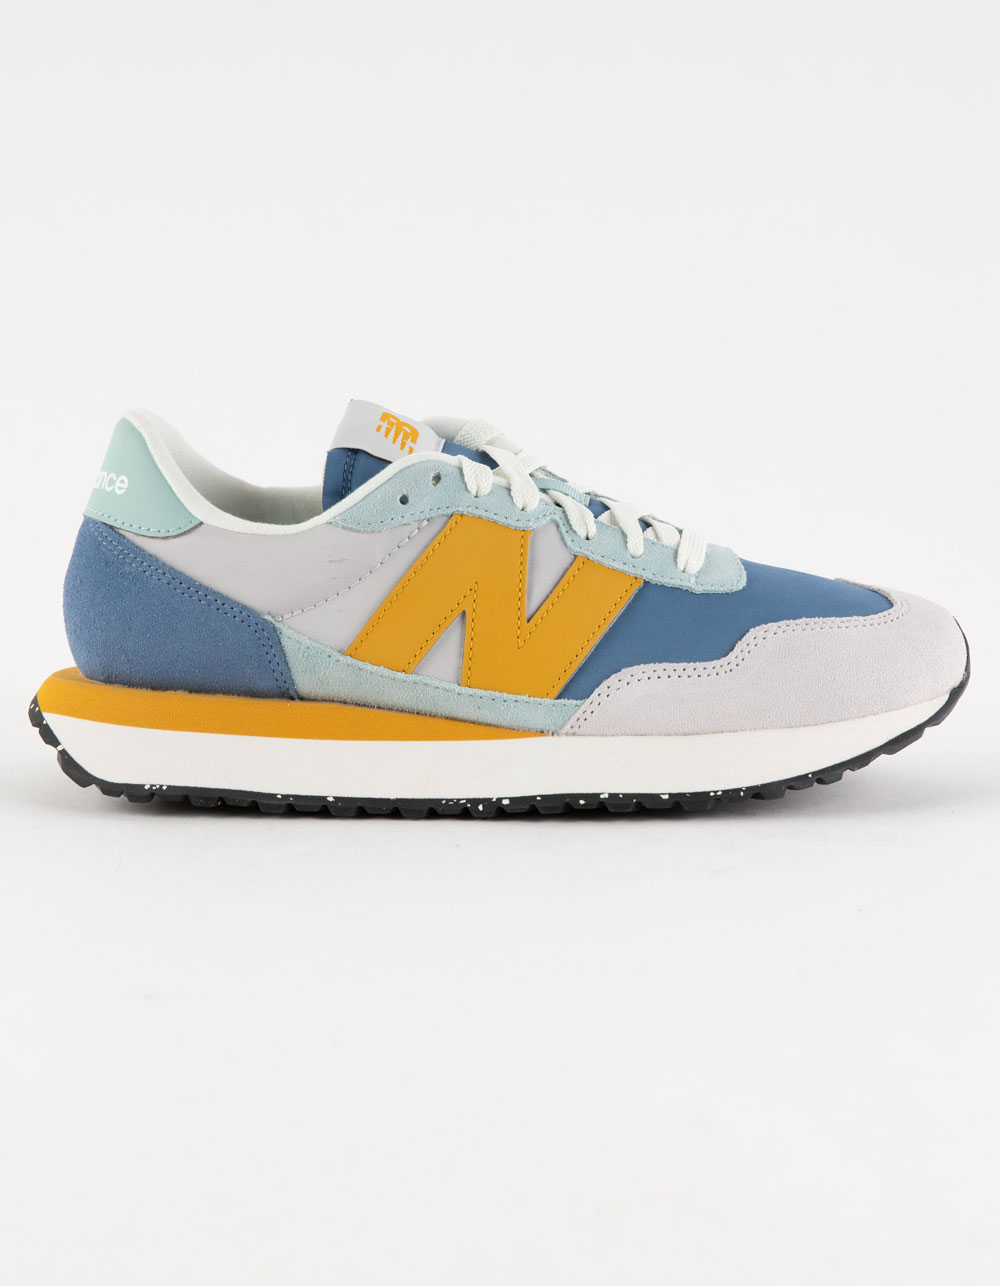 NEW BALANCE 237 Womens Shoes - FADED NAVY | Tillys